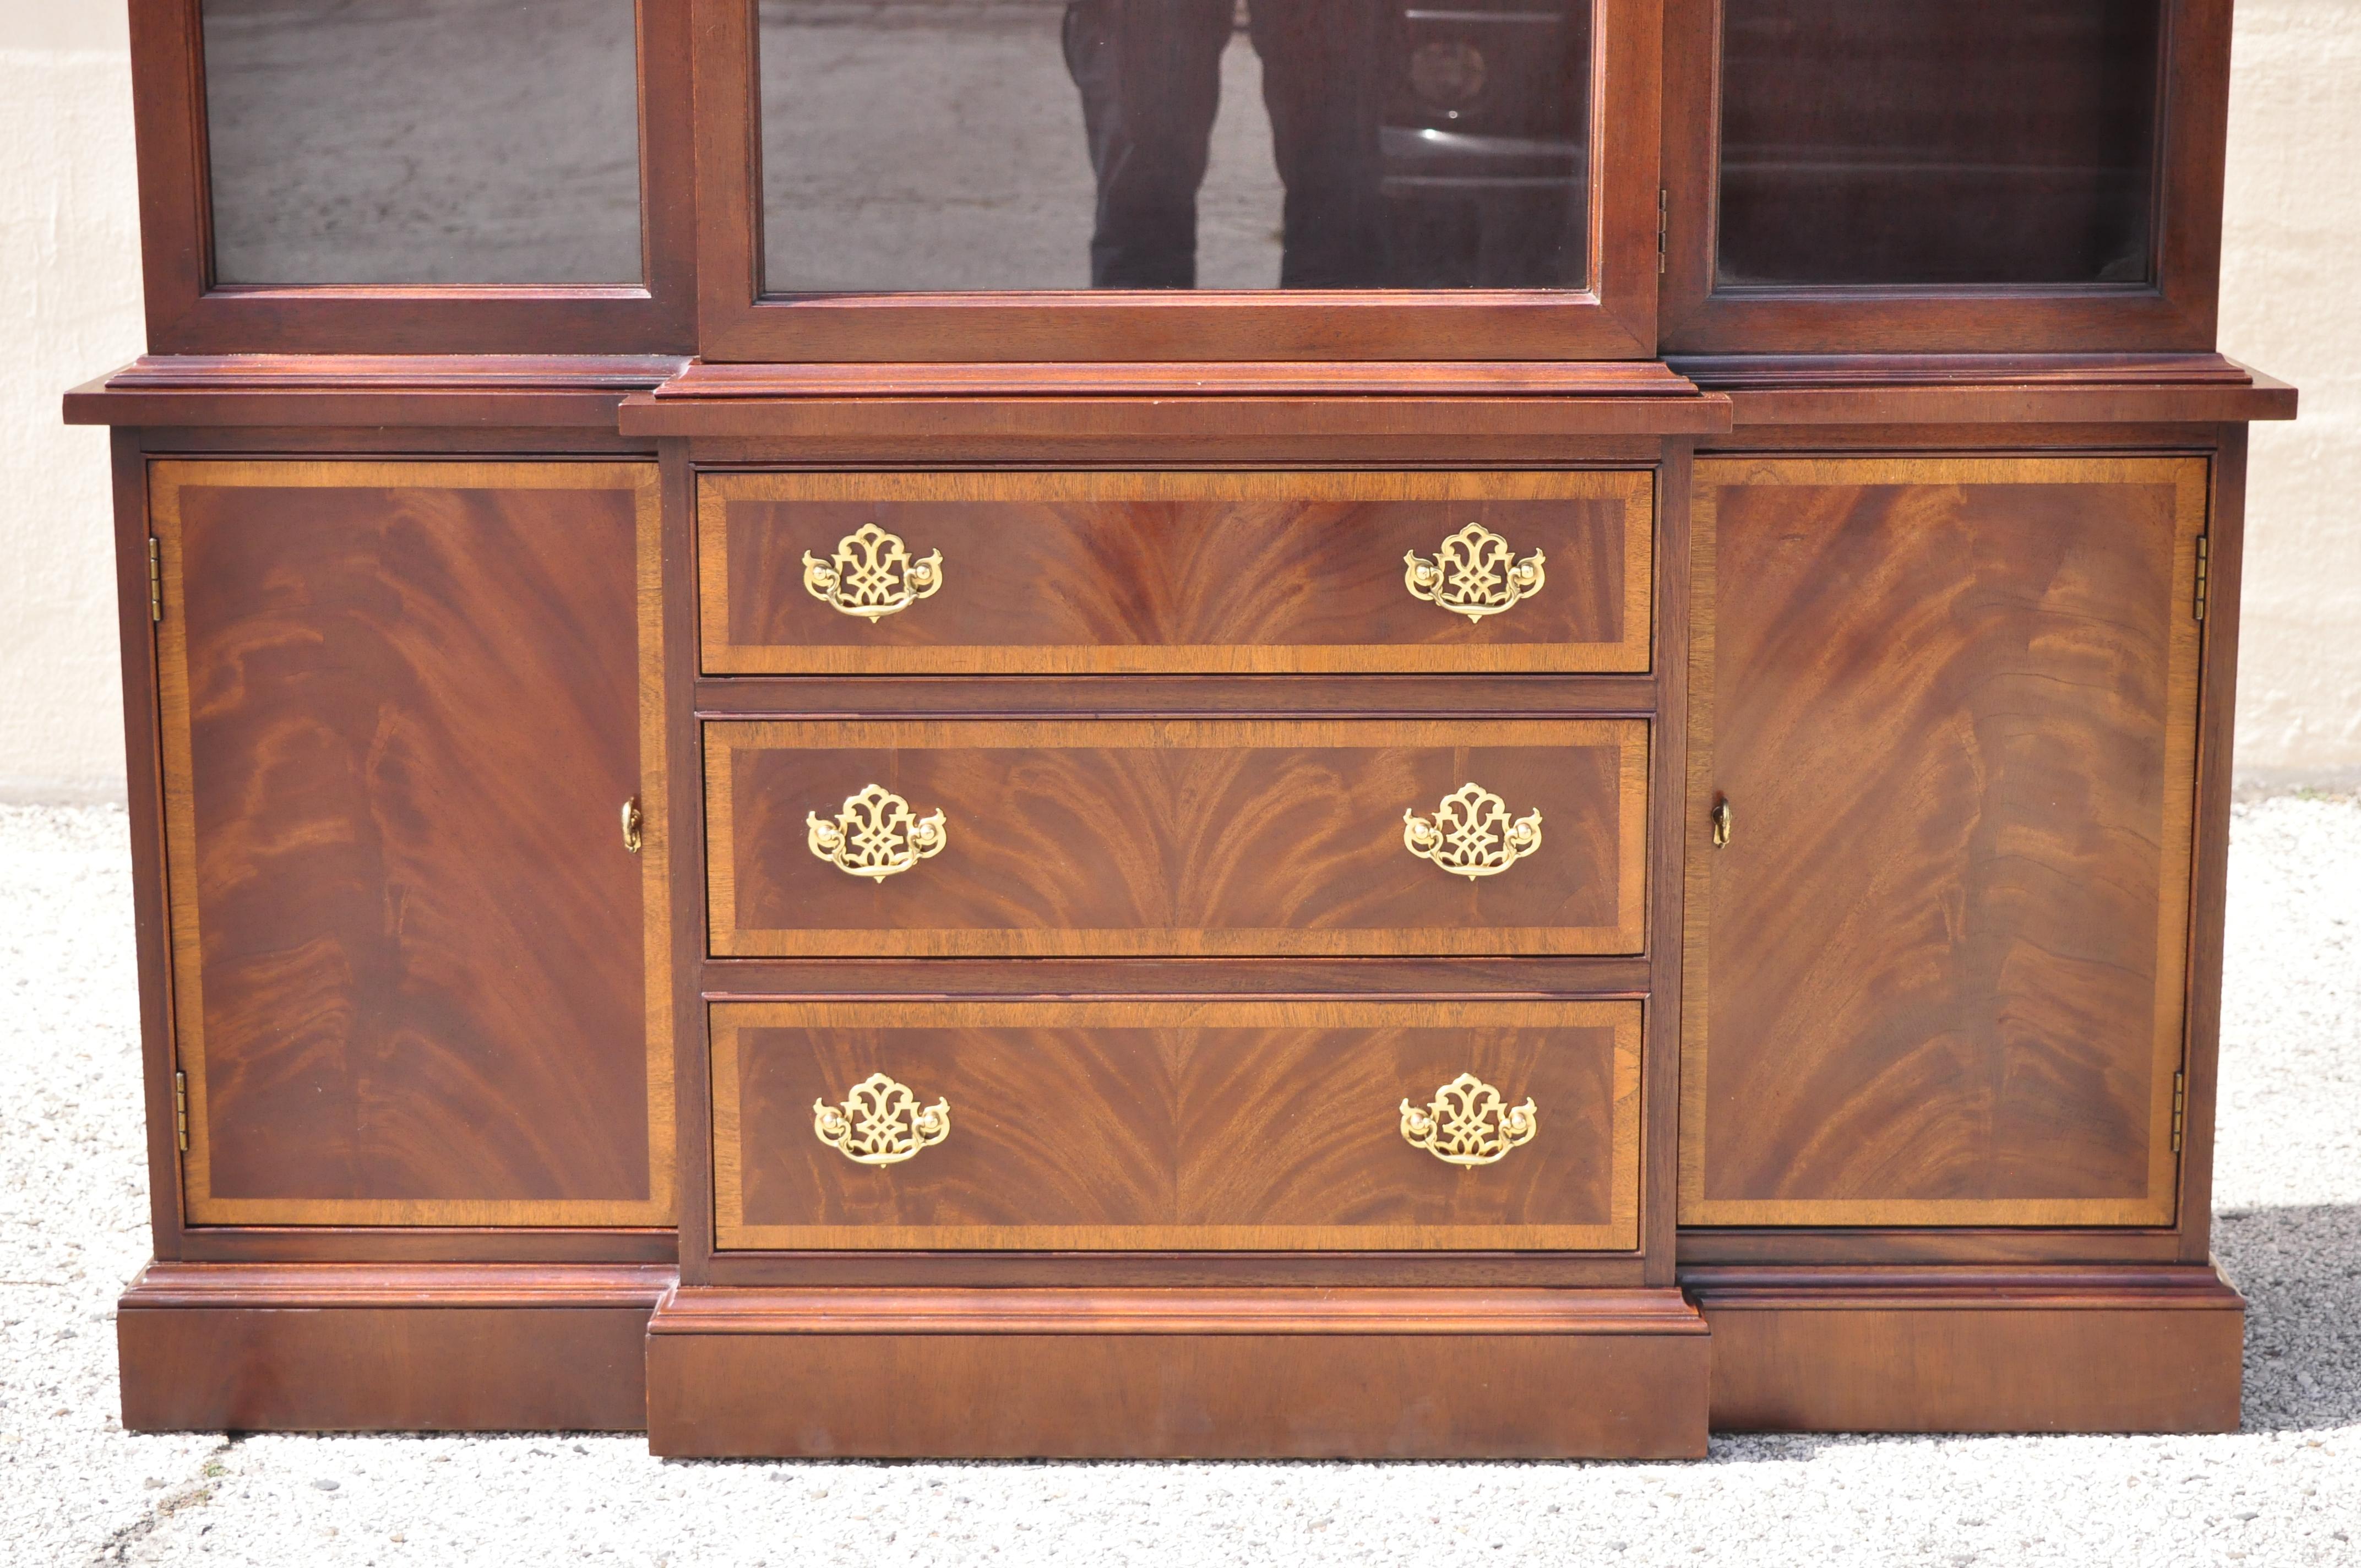 Hickory Chippendale style banded inlay China cabinet American masterpiece Collection. Item features banded inlay fronts, beautiful wood grain, 2 swing doors, 3 dovetailed drawers, 3 glass shelves, solid brass hardware, very nice vintage item,